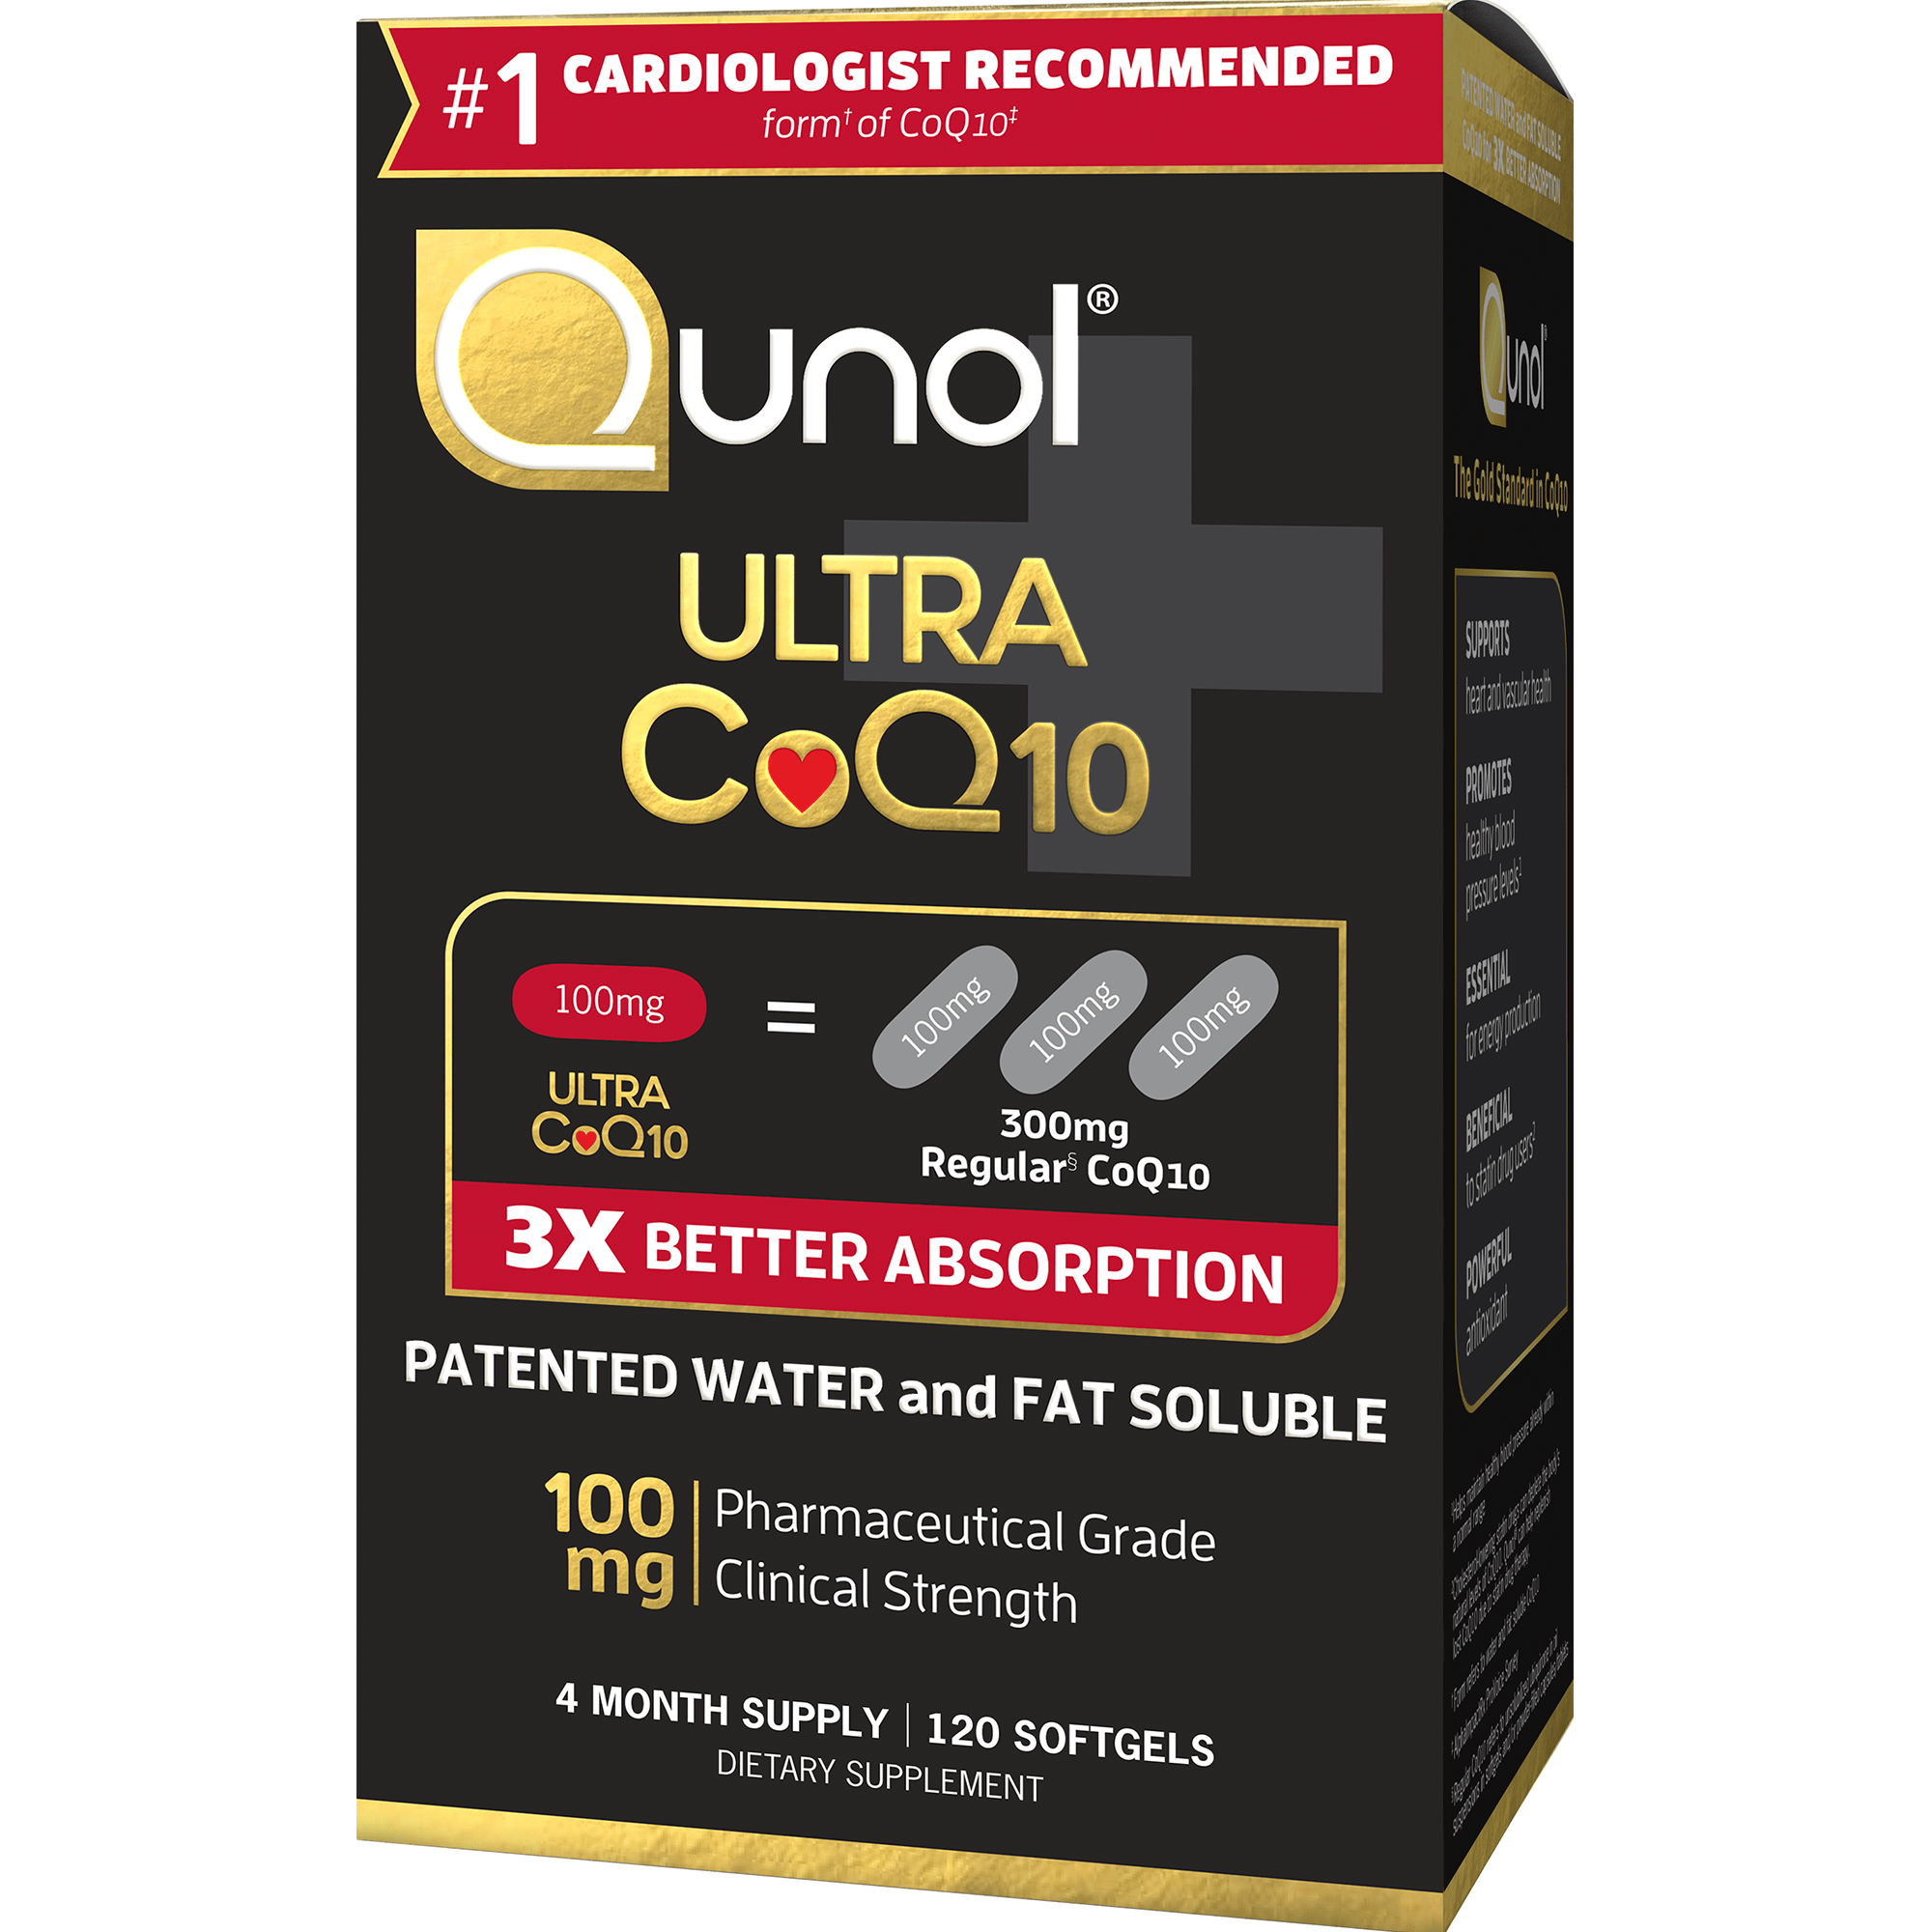 Qunol CoQ10 100mg Softgels, Ultra CoQ10 100mg, 3x Better Absorption, Antioxidant for Heart Health & Energy Production, Coenzyme Q10 Vitamins and Supplements, 4 Month Supply, 120 Count - image 2 of 6